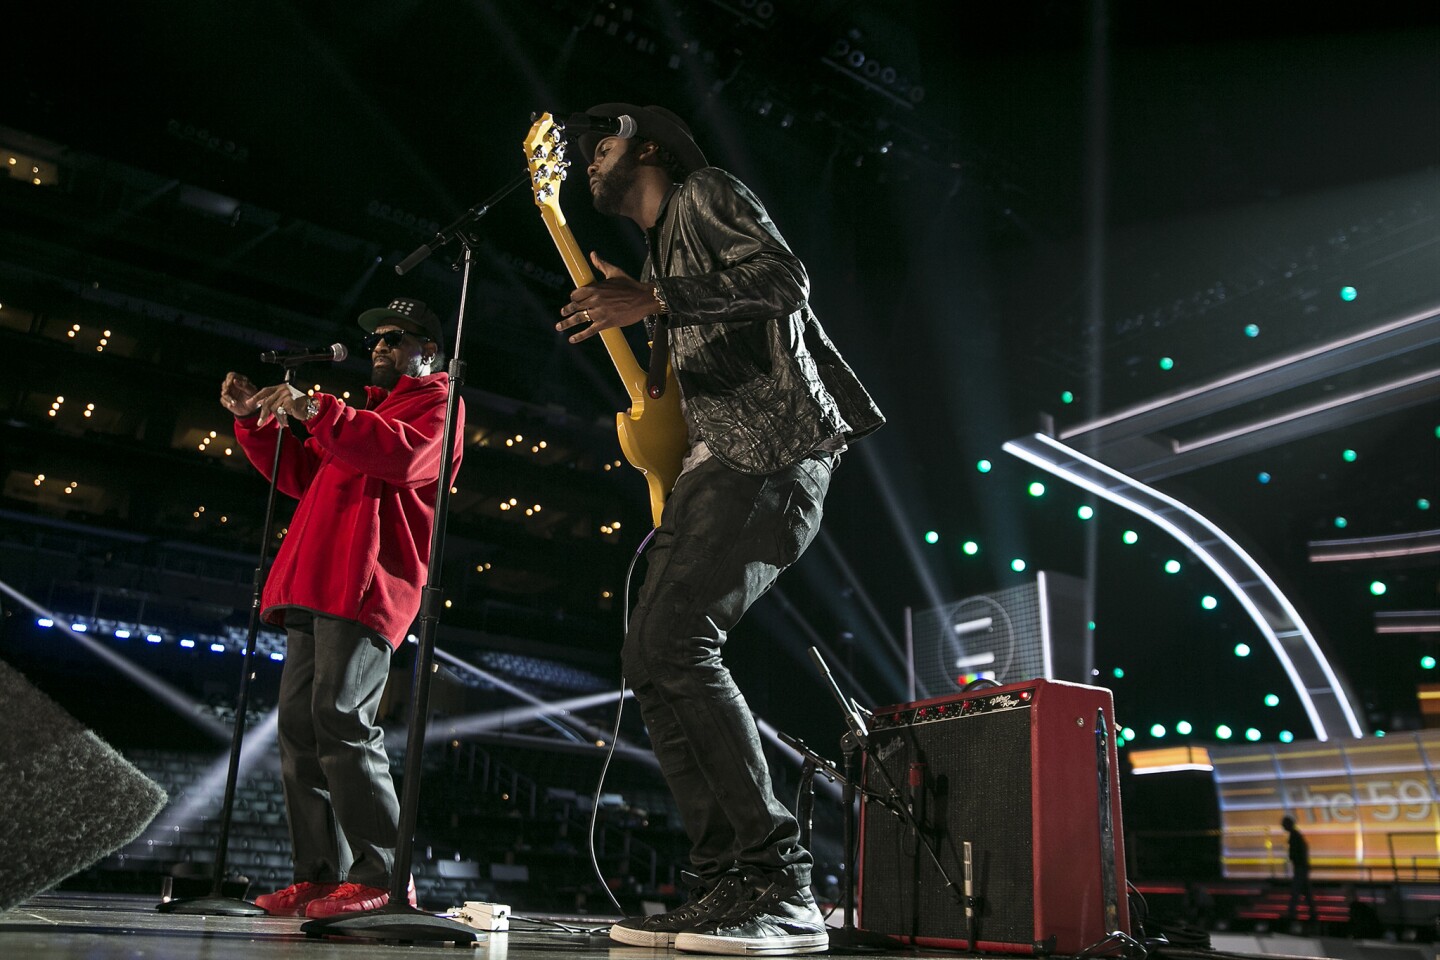 William Bell, left, and Gary Clarke Jr. perform "Born Under a Bad Sign," during rehearsal for the 59th Grammy Awards at Staples Center.